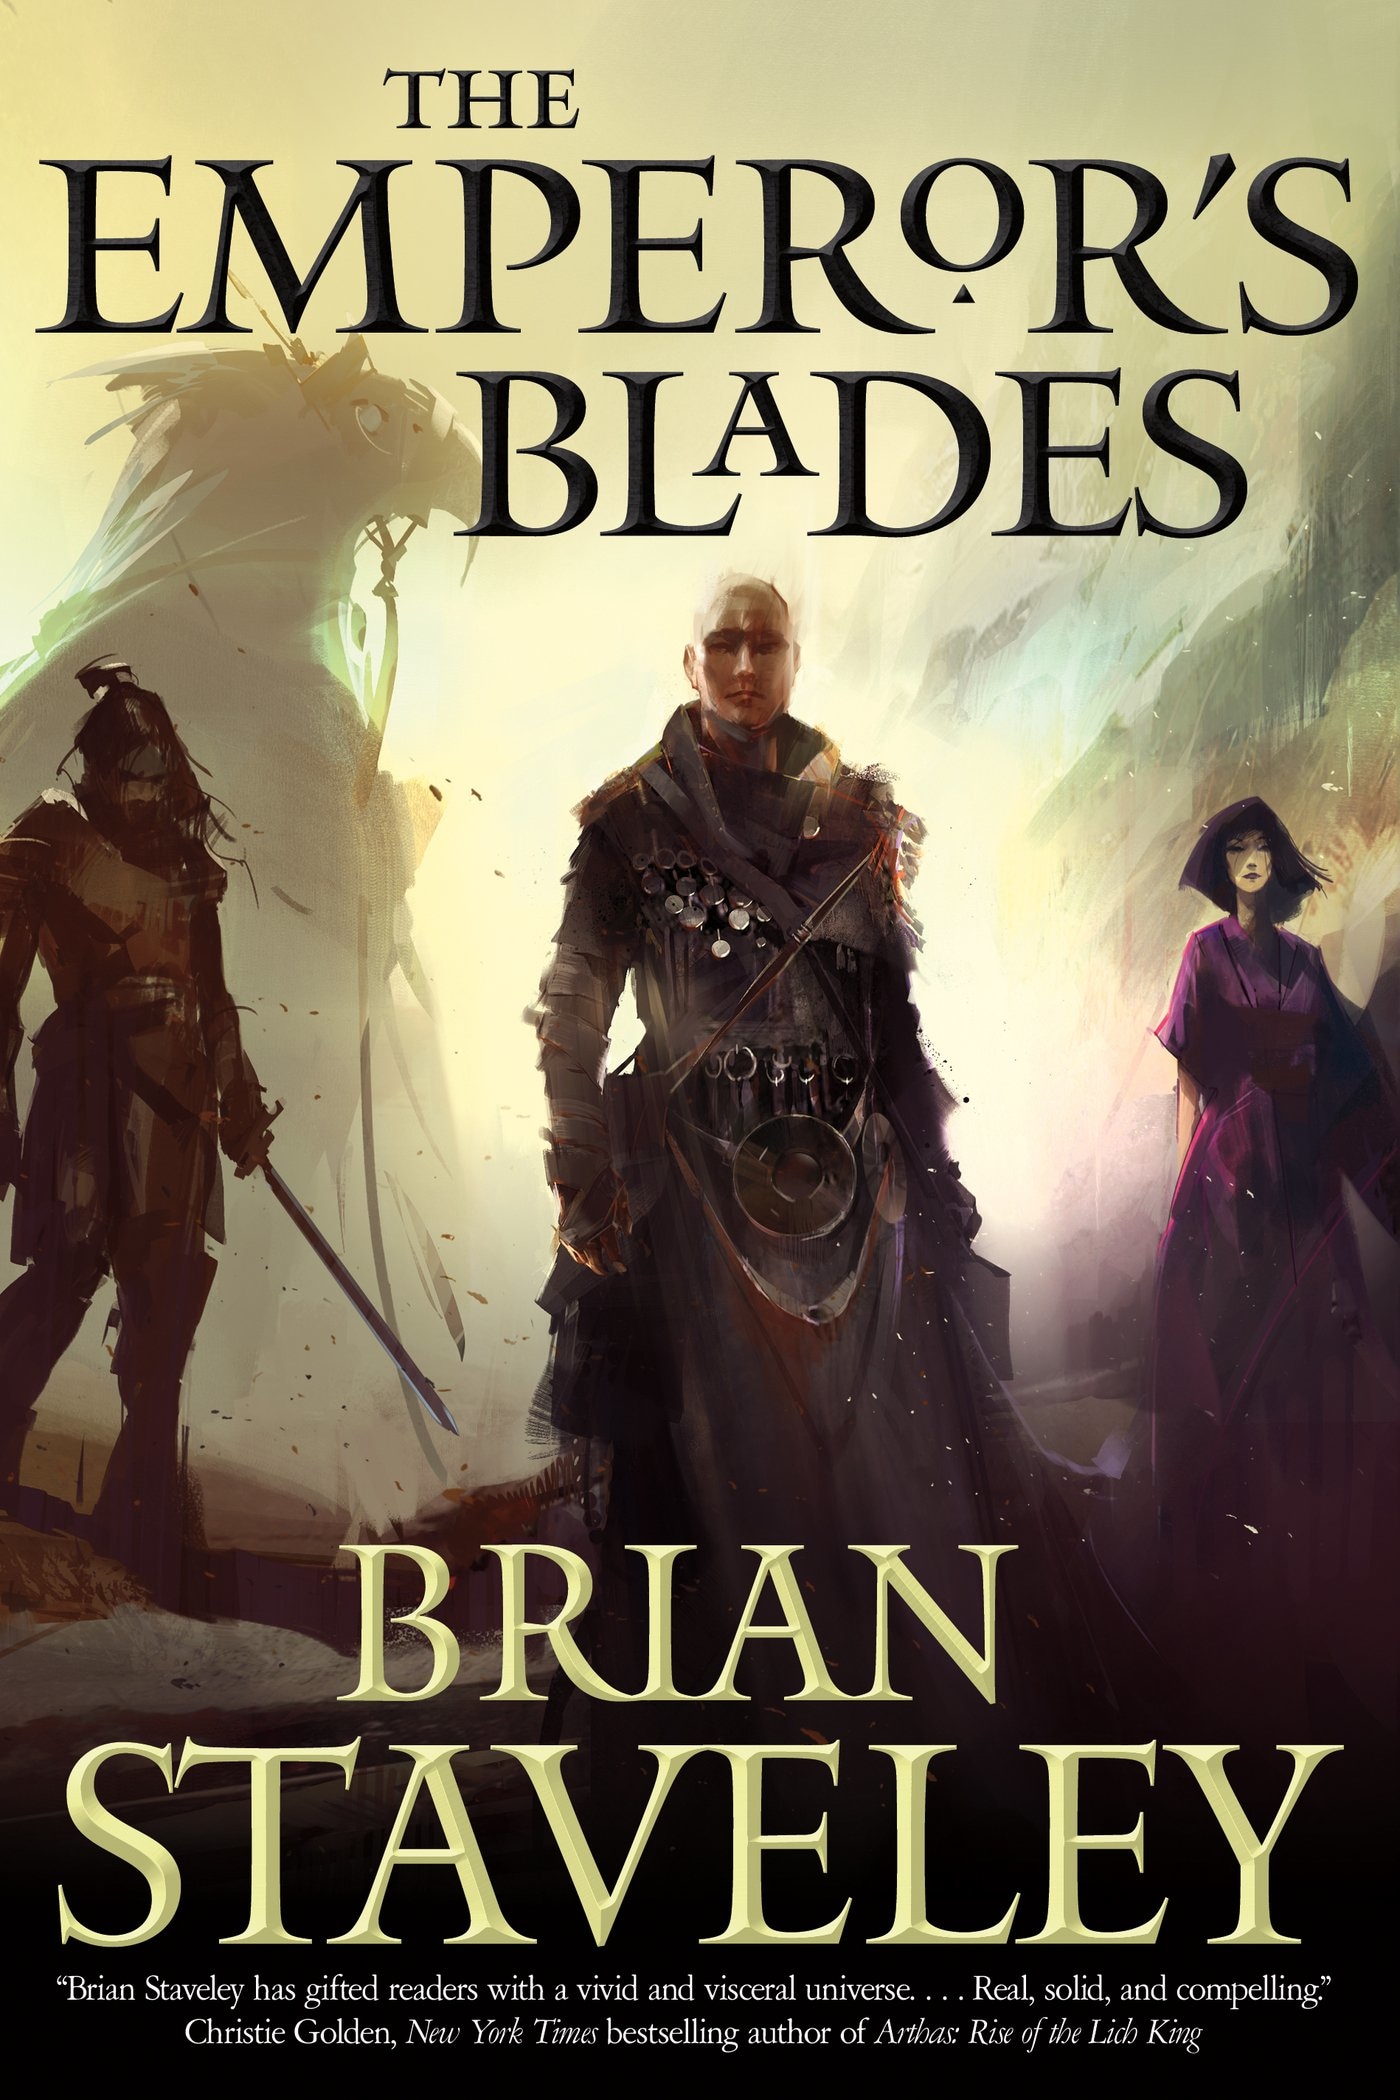 Book “The Emperor's Blades” by Brian Staveley